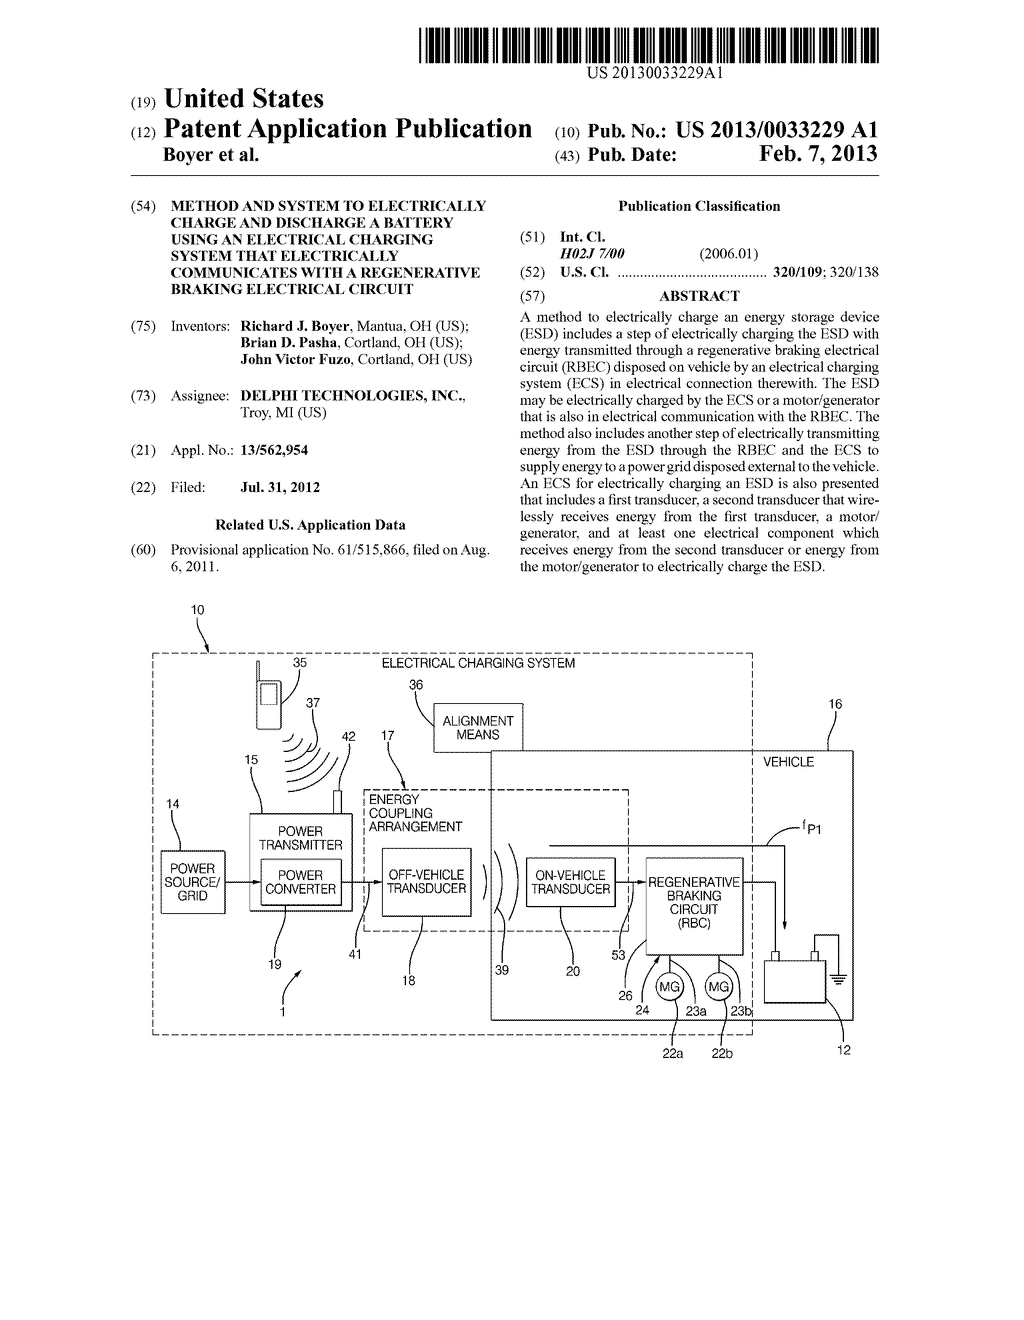 METHOD AND SYSTEM TO ELECTRICALLY CHARGE AND DISCHARGE A BATTERY USING AN     ELECTRICAL CHARGING SYSTEM THAT ELECTRICALLY COMMUNICATES WITH A     REGENERATIVE BRAKING ELECTRICAL CIRCUIT - diagram, schematic, and image 01